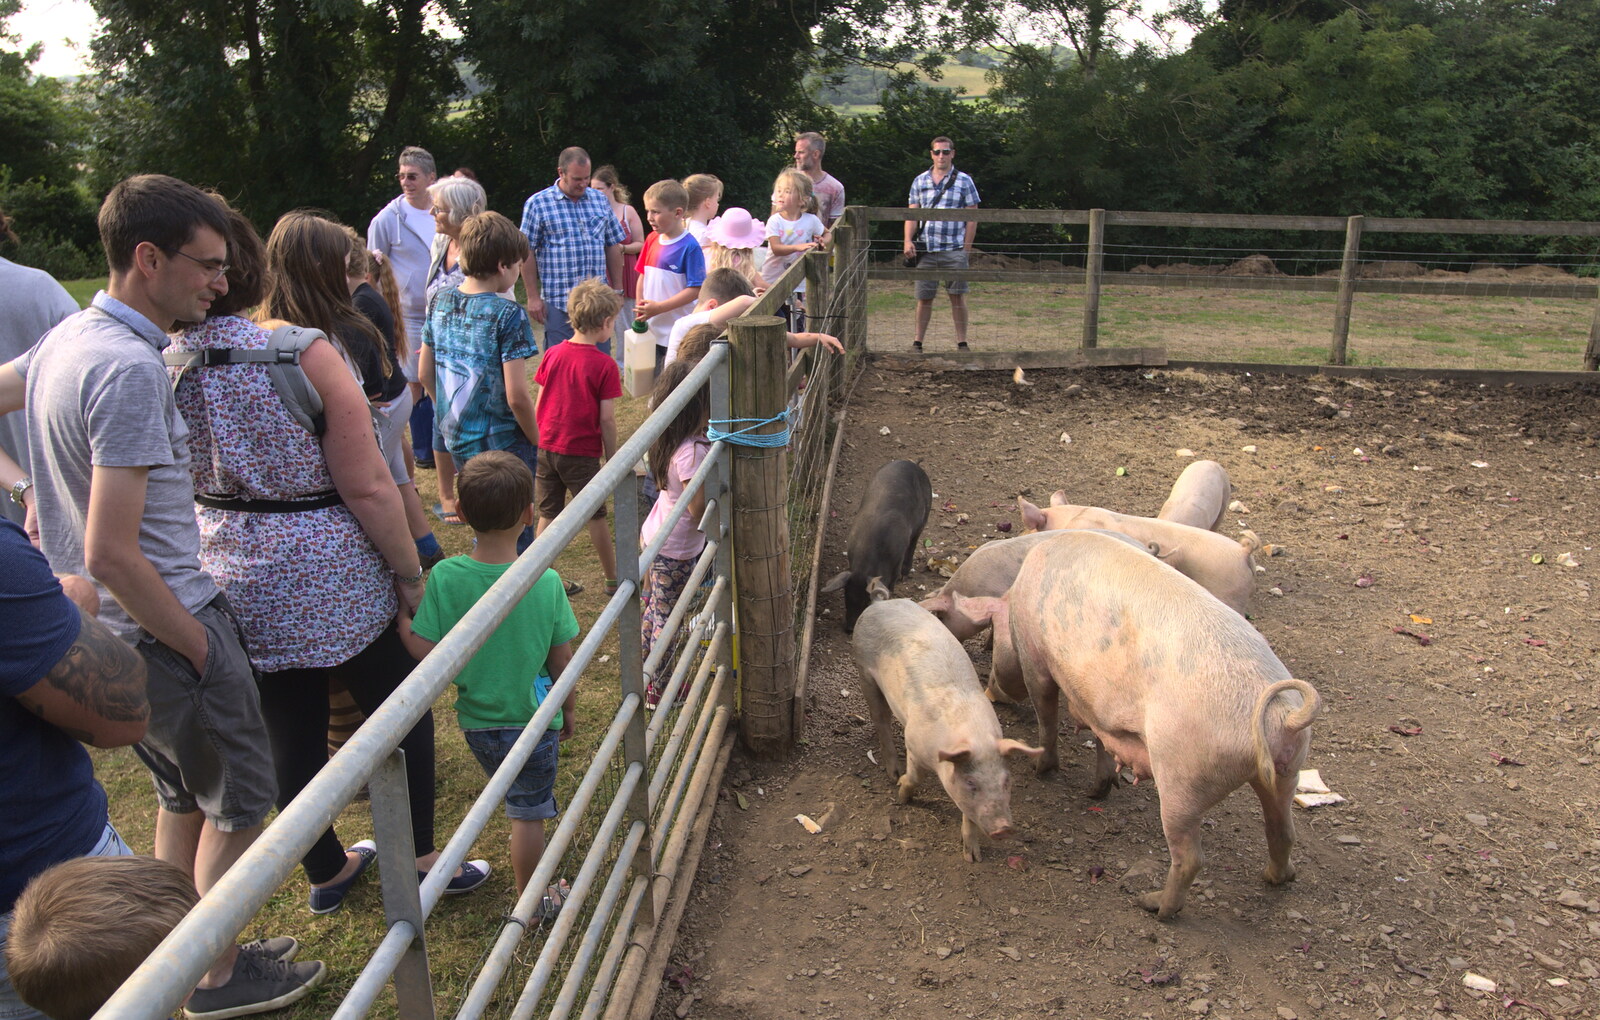 A visit to the pigs from Camping With Sean, Ashburton, Devon - 8th August 2016